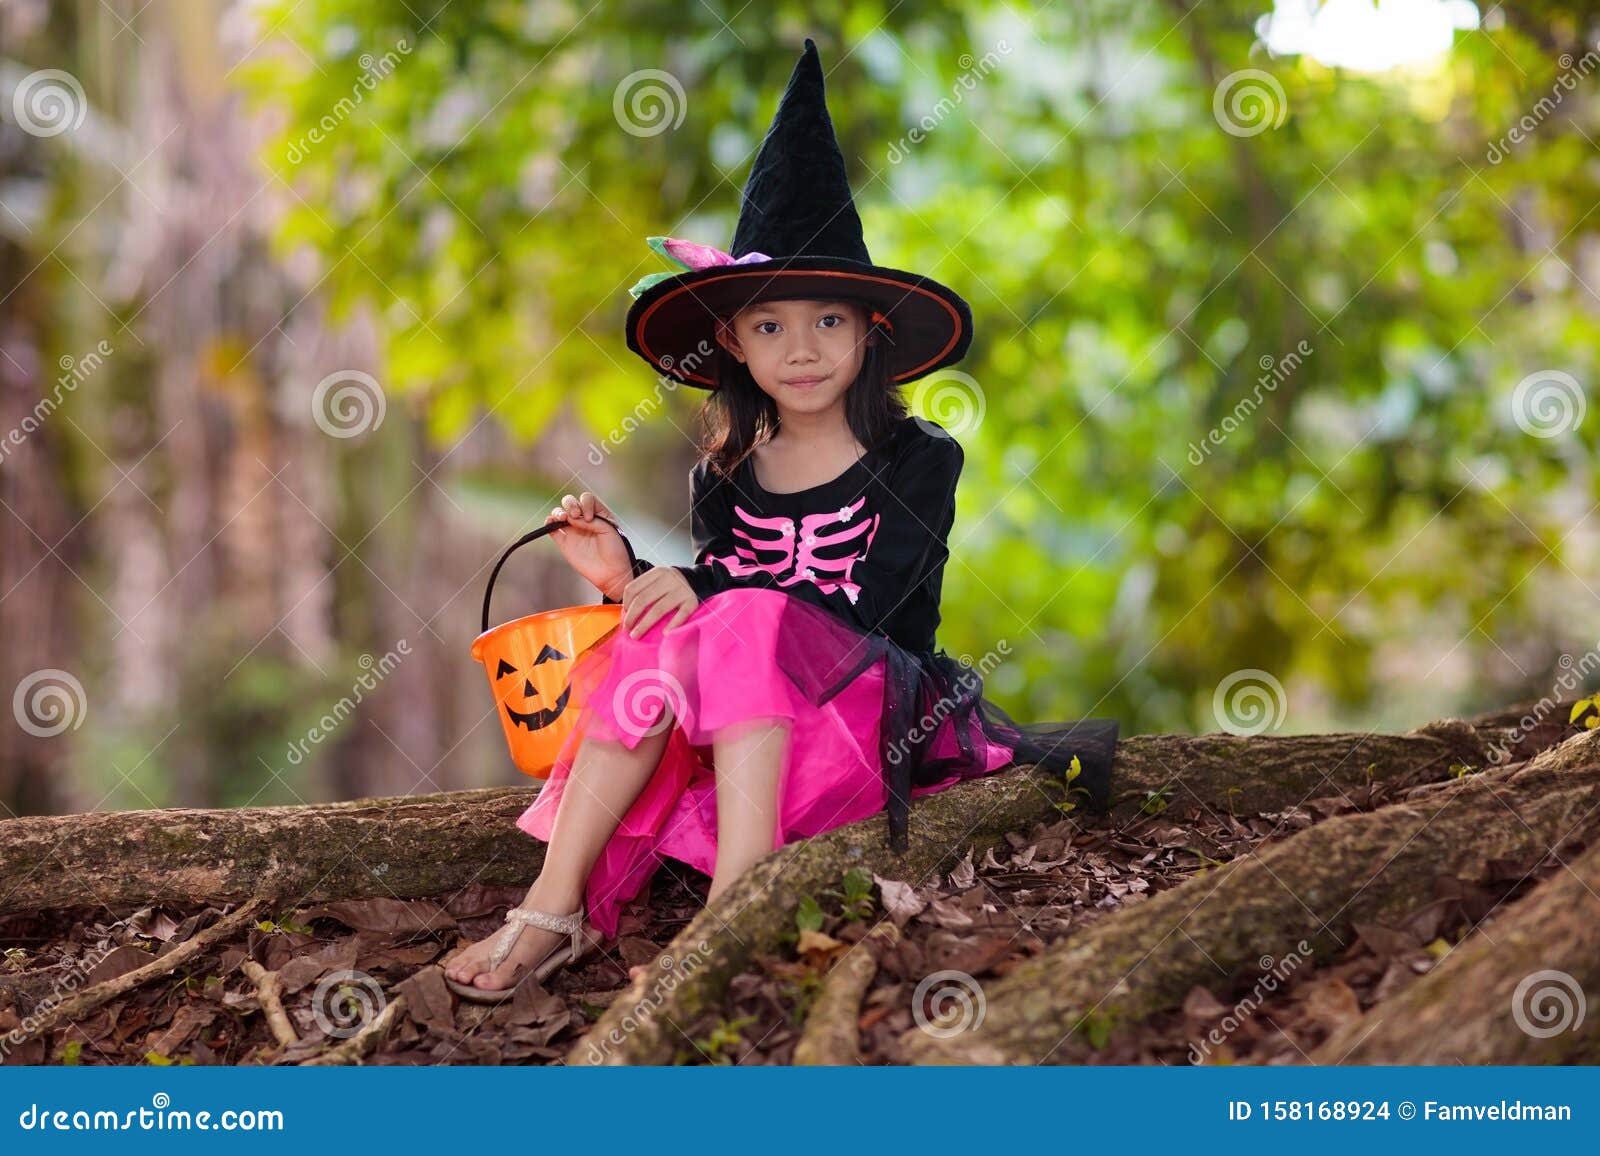 Kids with Pumpkins in Halloween Costumes Stock Photo - Image of black ...